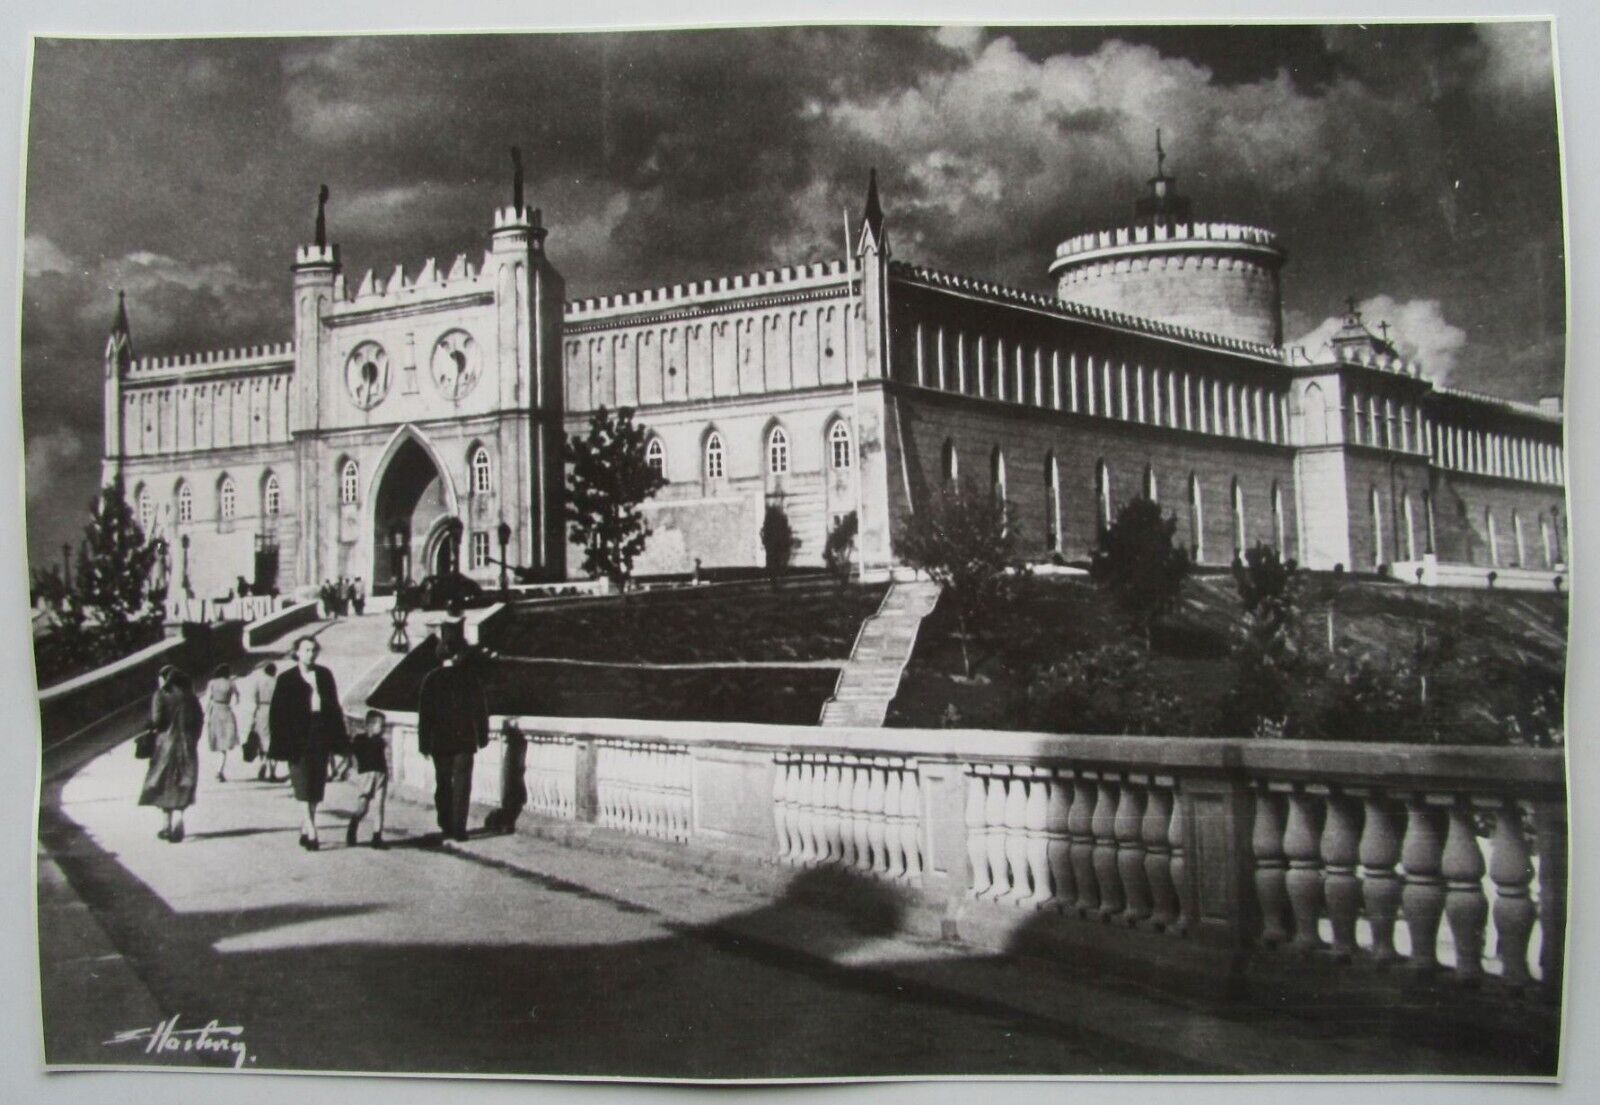 Edward Hartwig  Castle in Lublin - original photograph from the 1960s